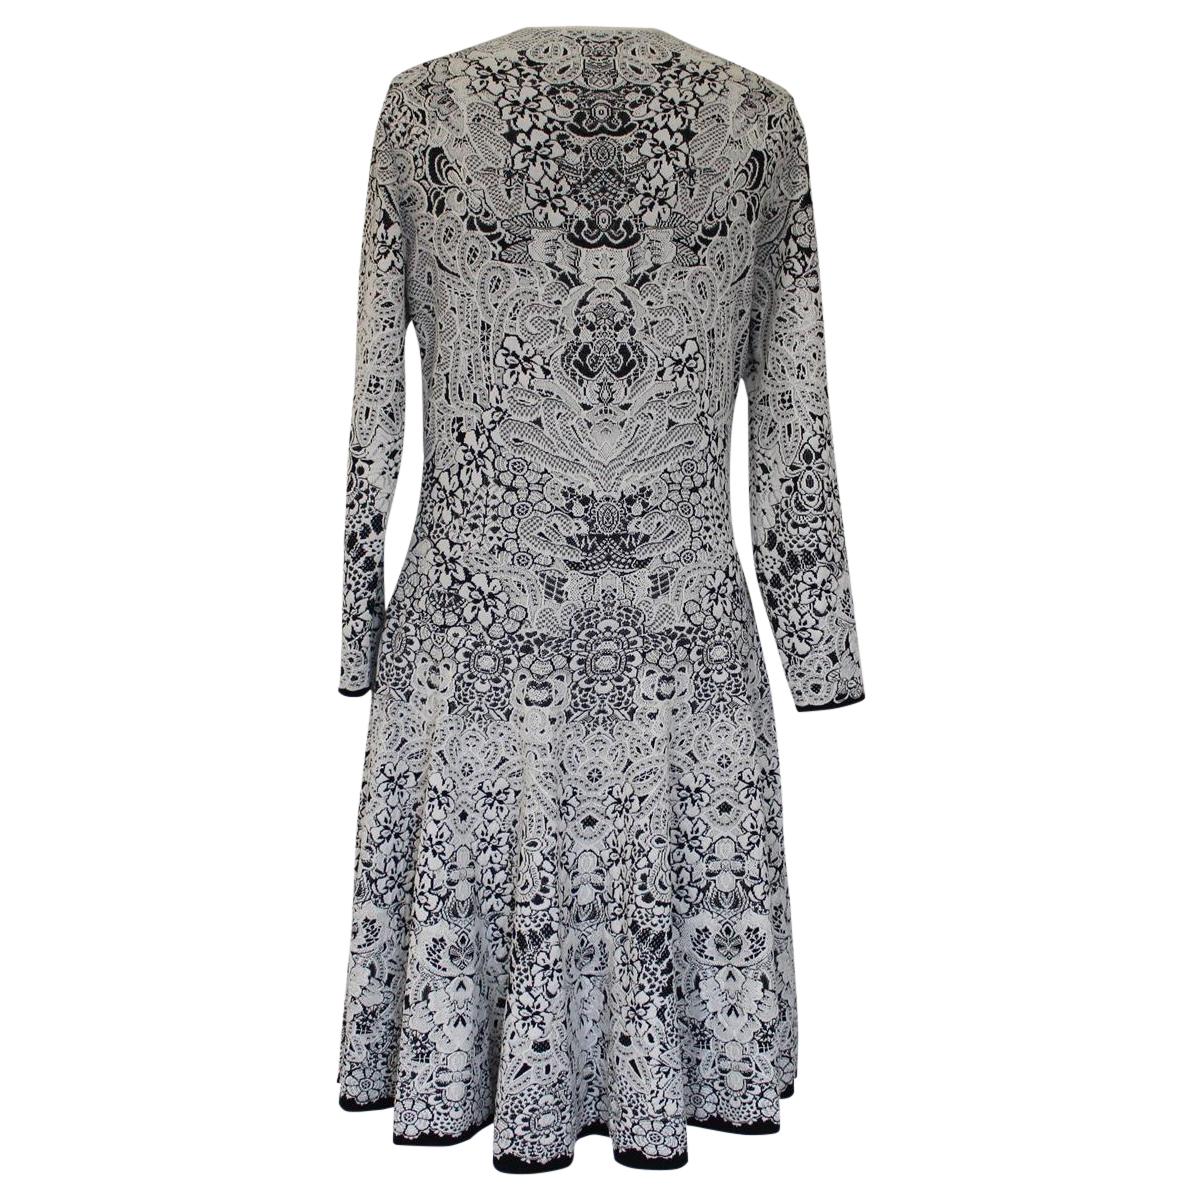 Beautiful McQueen dress
Viscose (48%), silk (44%) and nylon
Fancy print
Black and white
Long sleeve
Shoulder cm 40 (15.7 inches)
Total length cm 95 (37.4 inches)
Worldwide express shipping included in the price !